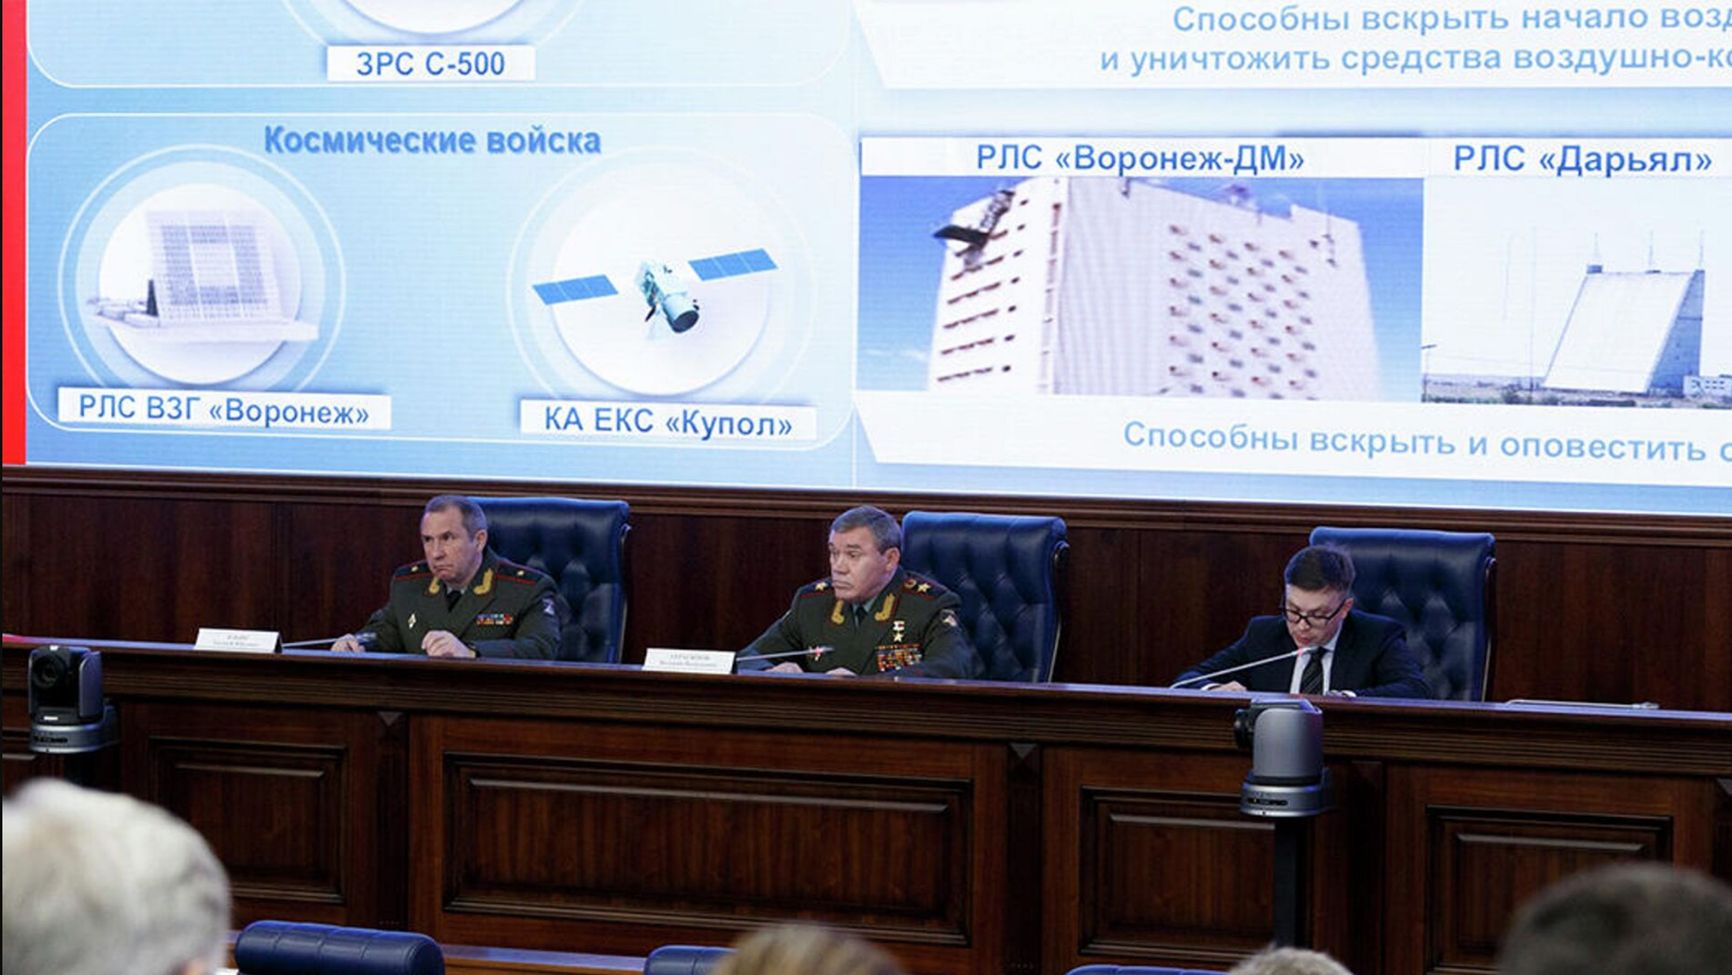  Chief of the General Staff of the Russian Armed Forces Valery Gerasimov against the backdrop of a Kupol EKS presentation, Dec. 18, 2019